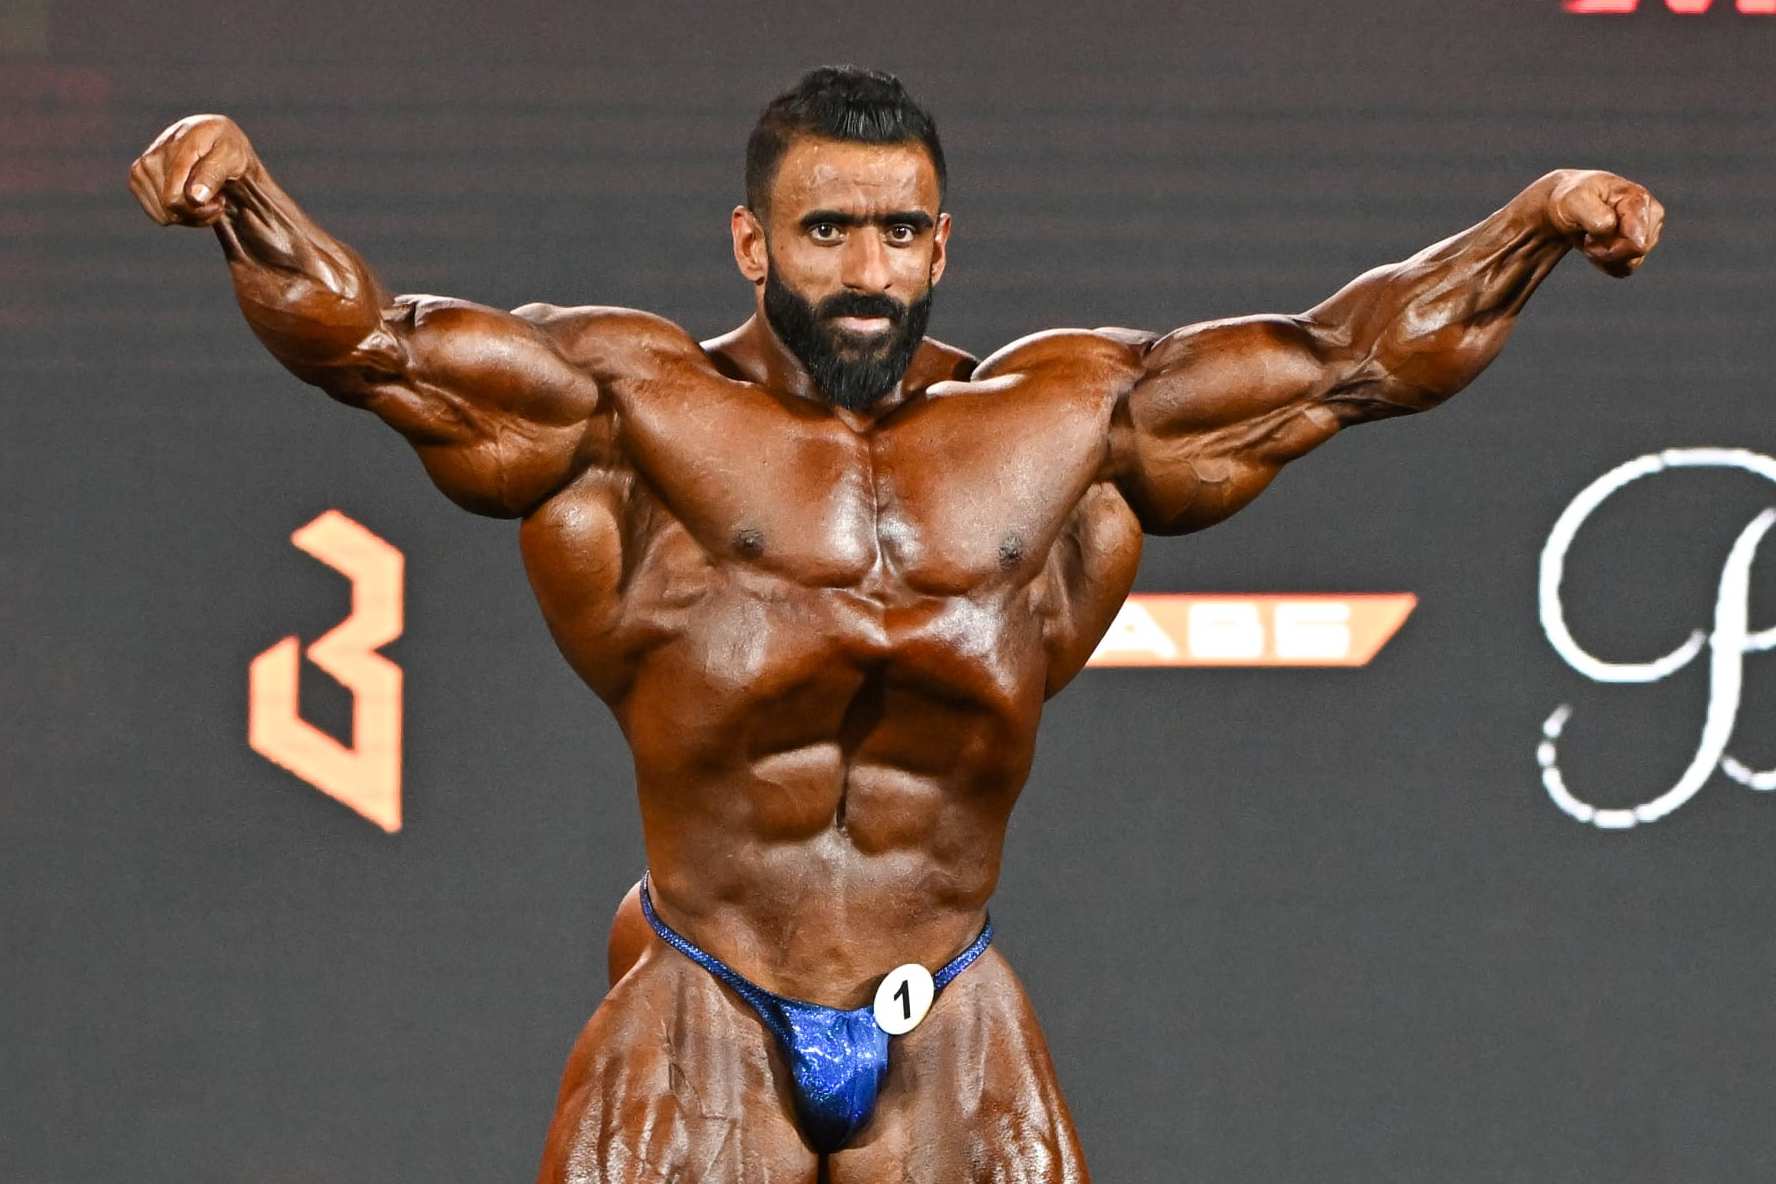 The 2023 Masters Olympia Will Award $229,000 in Overall Prize Money -  Breaking Muscle